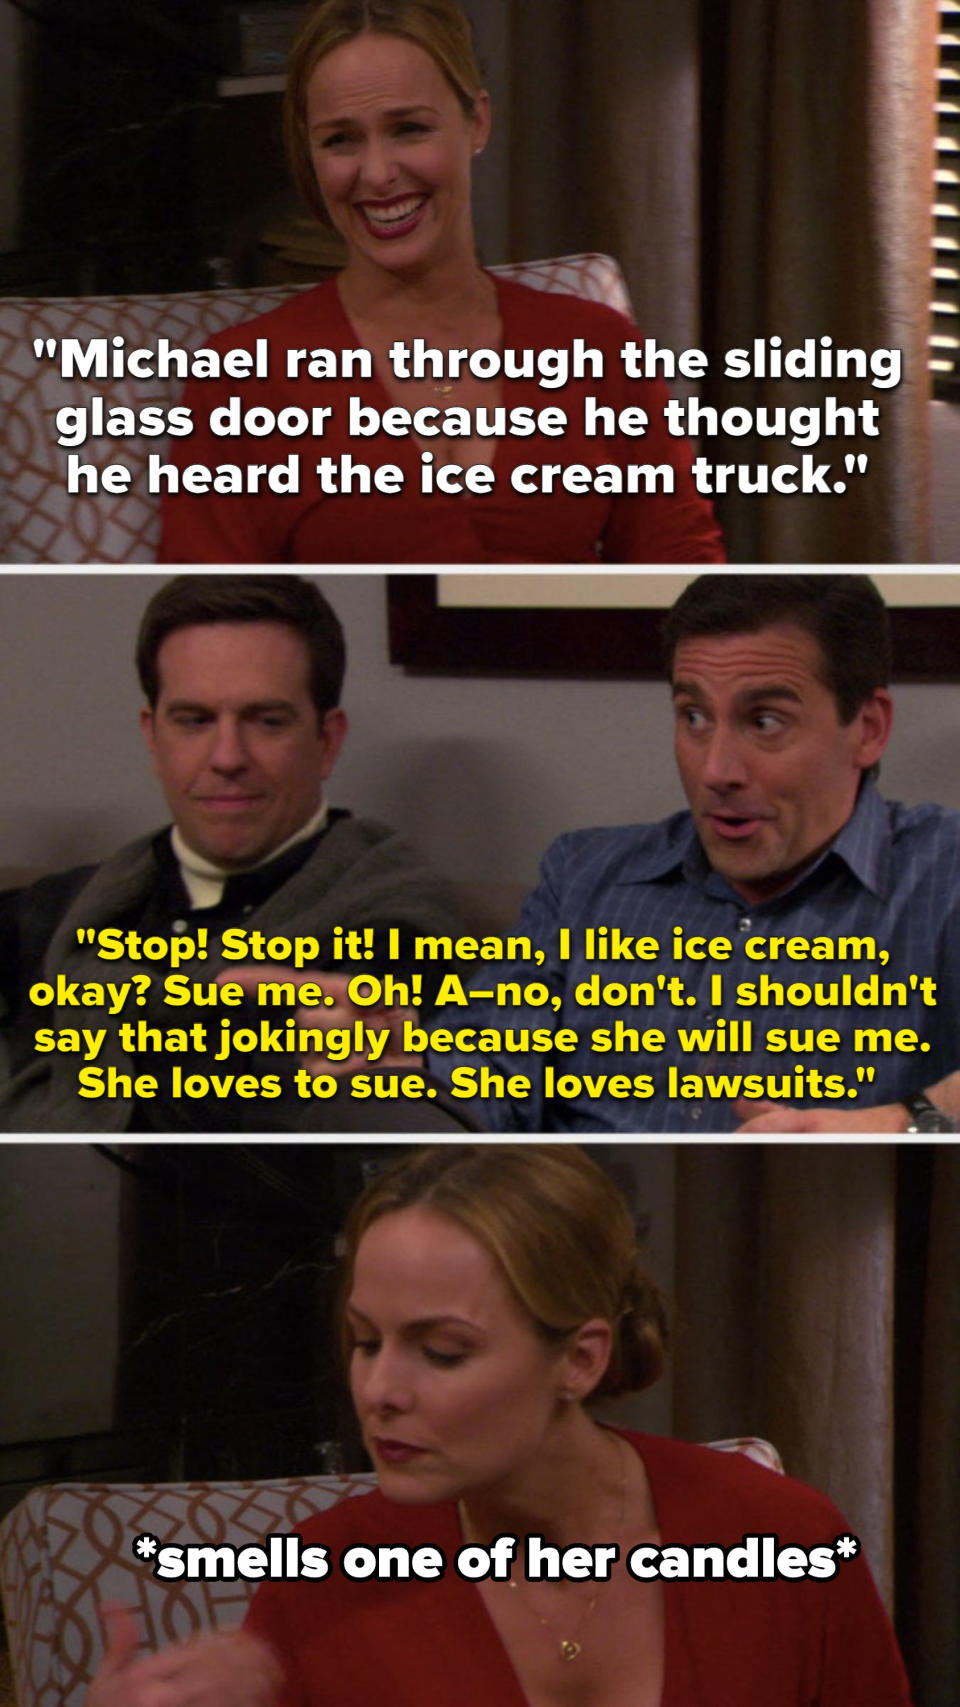 Jan laughingly says, Michael ran through the sliding glass door because he thought he heard the ice cream truck," and Michael says, Sue me, I shouldn't say that jokingly because she will sue me, she loves lawsuits, and Jam smells one of her candles